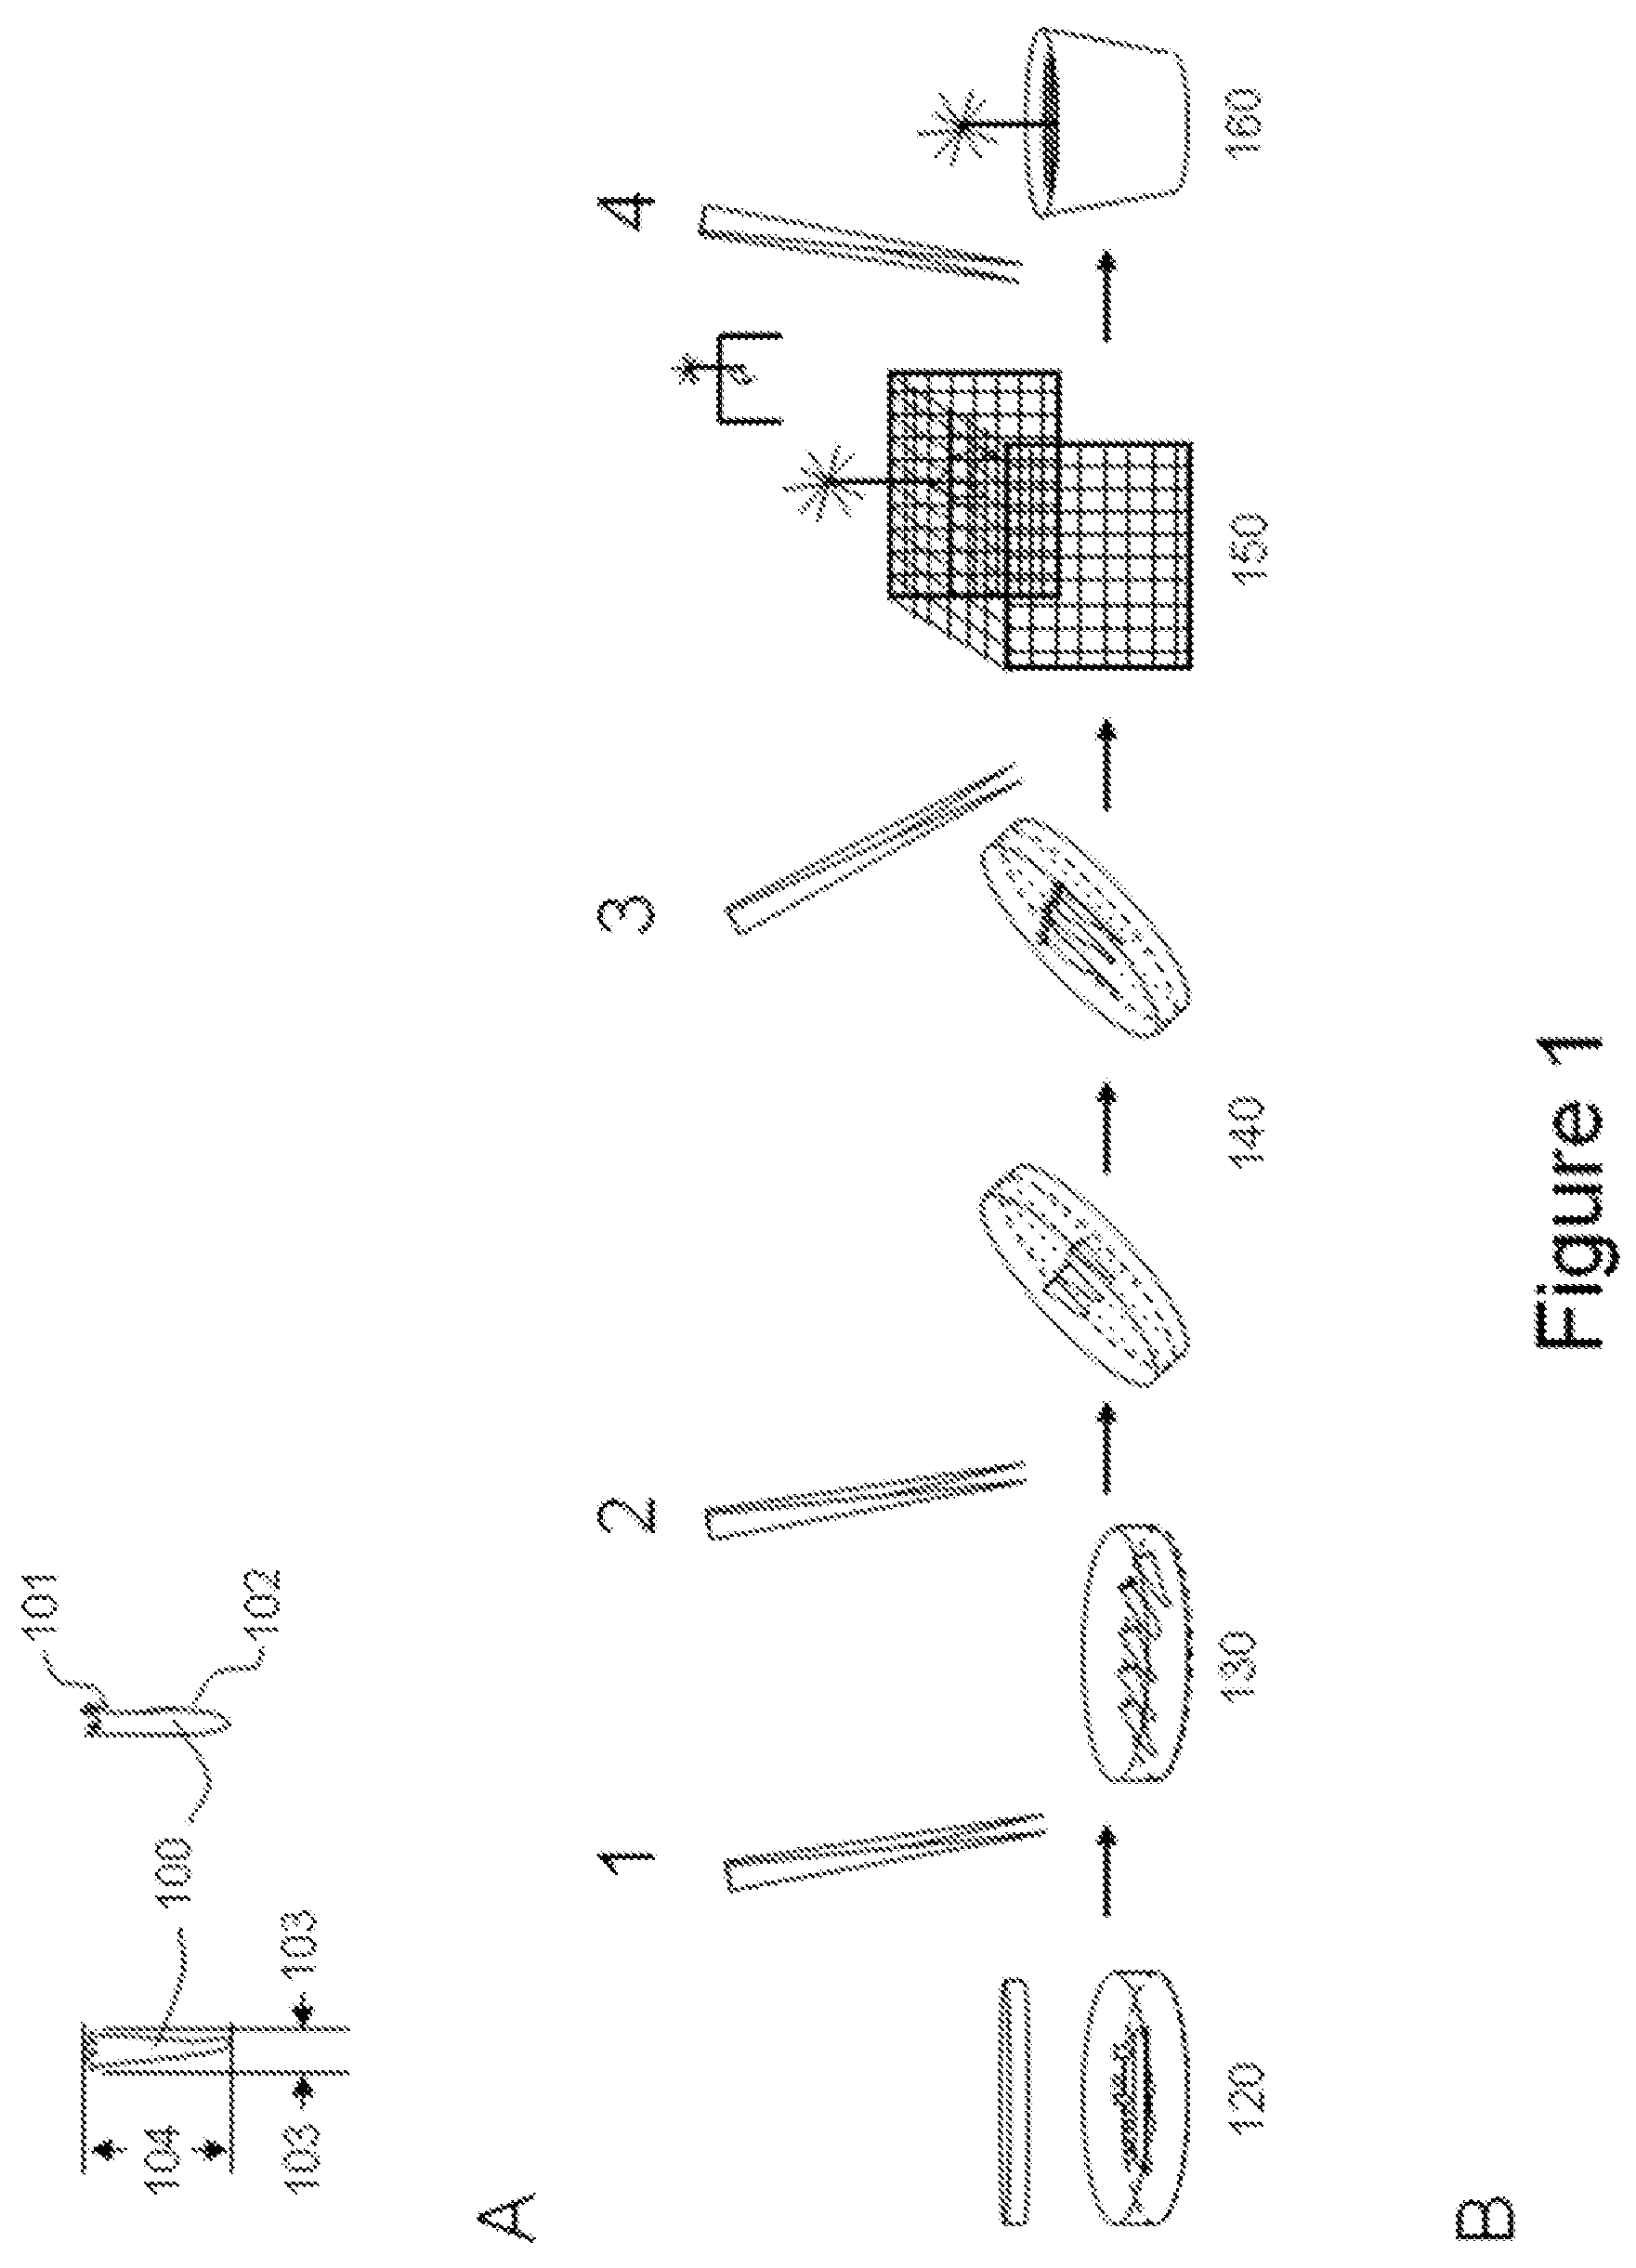 Separator device, deposition device and system for handling of somatic plant embryos